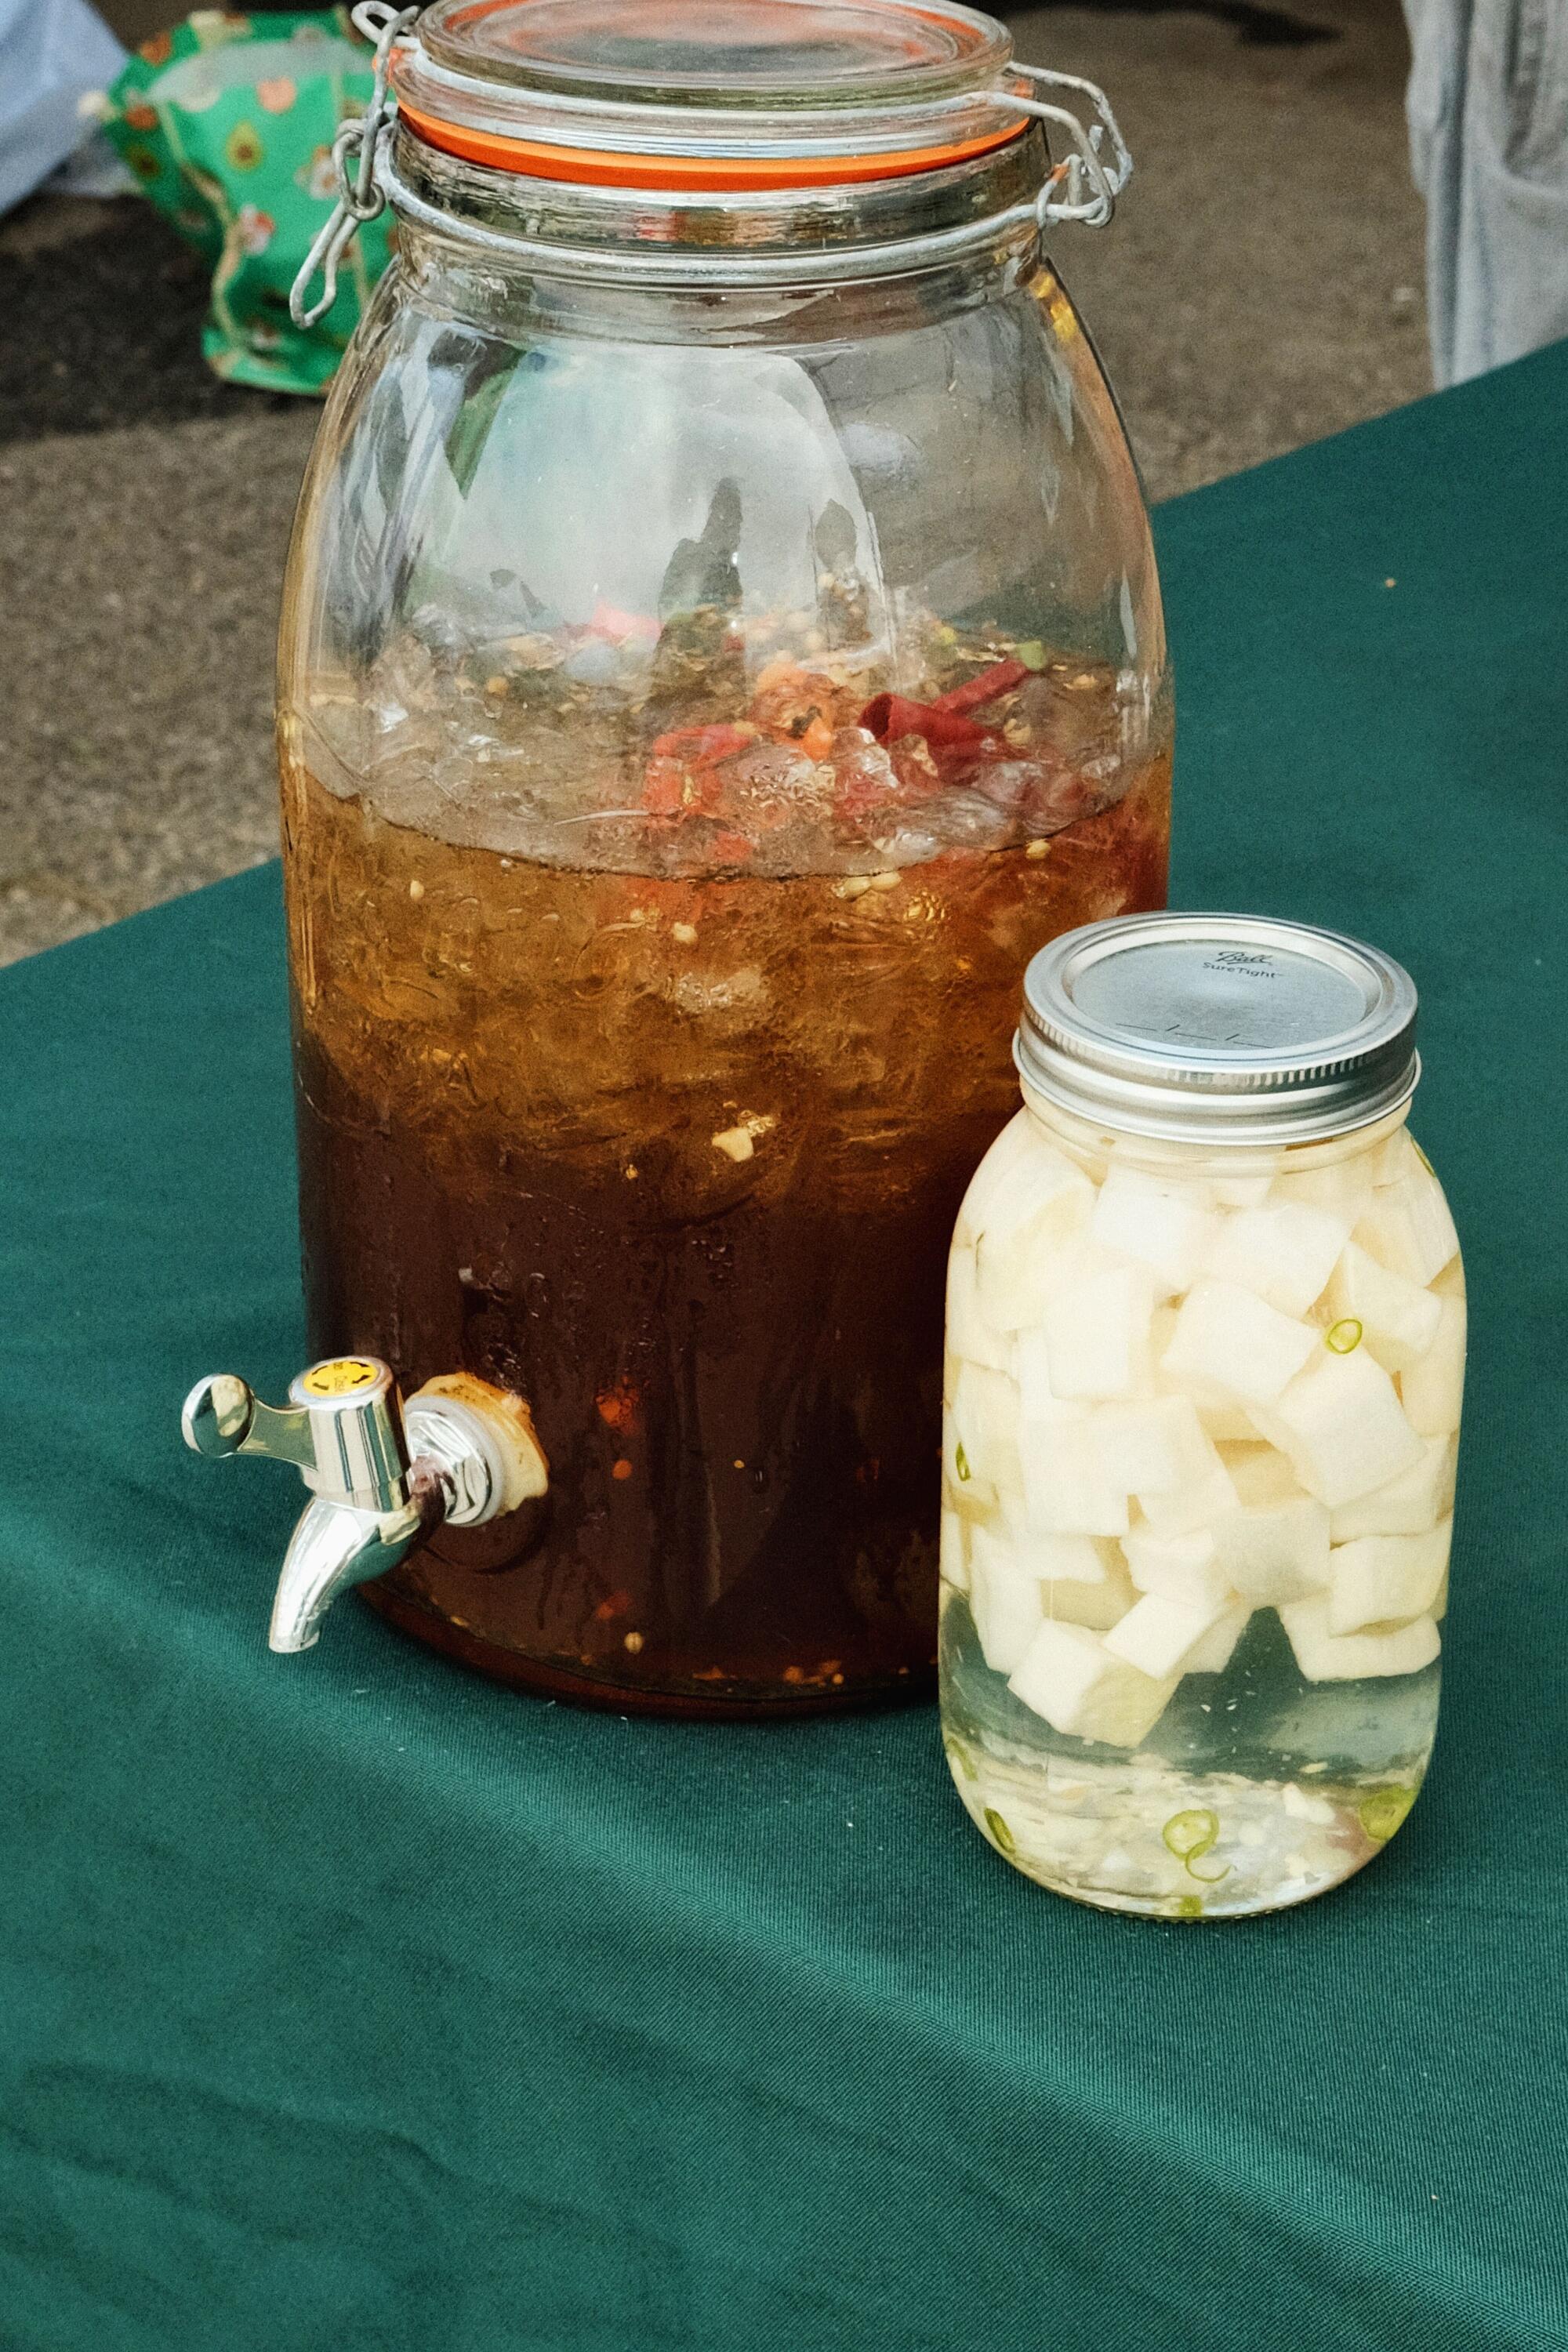 A jar of white pickled radish and a large container of iced brown pickle brine on a green tablecloth